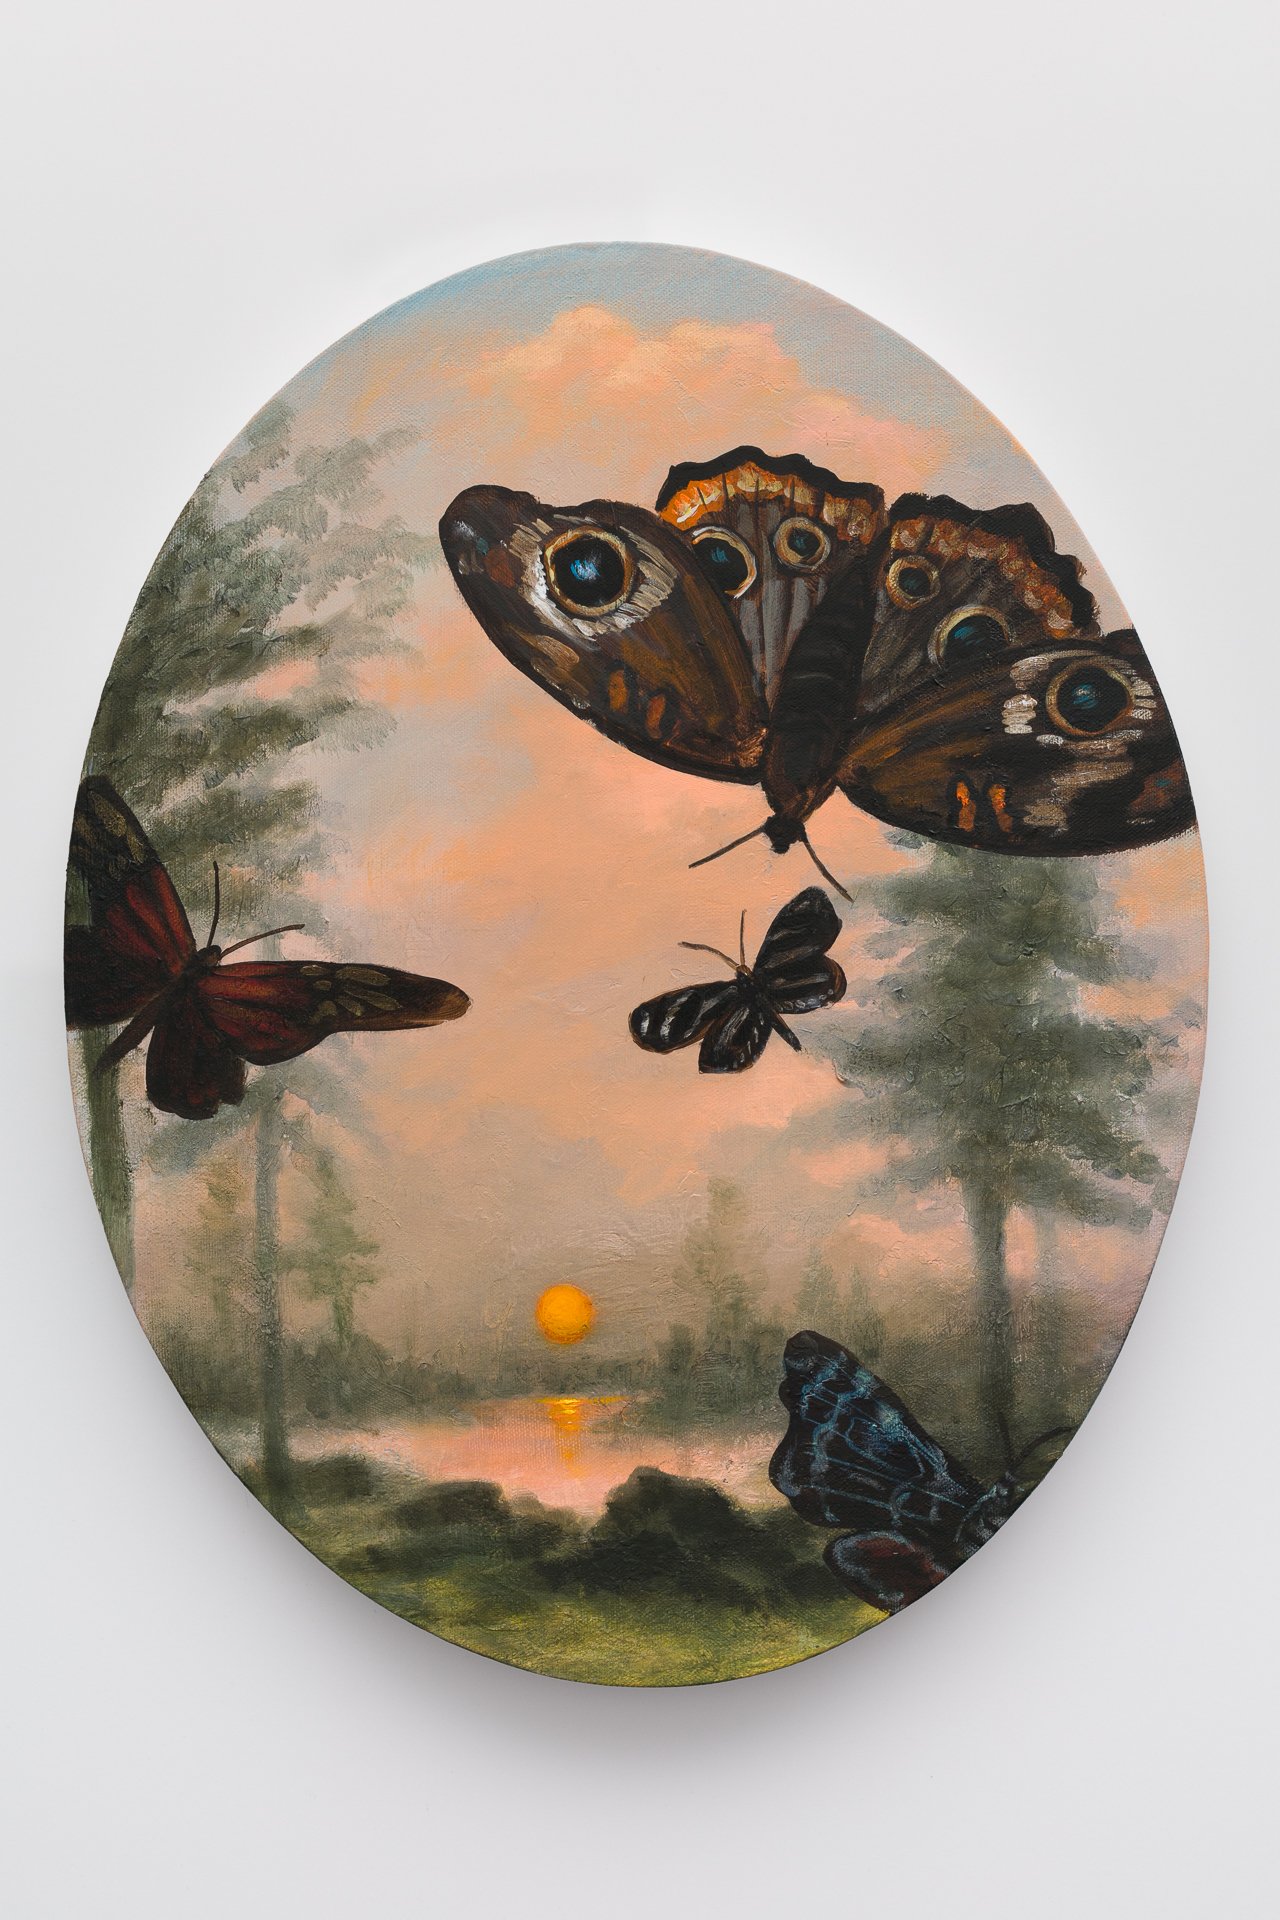 Smokey Sunset With Four Moths, 20"x16" (oval)